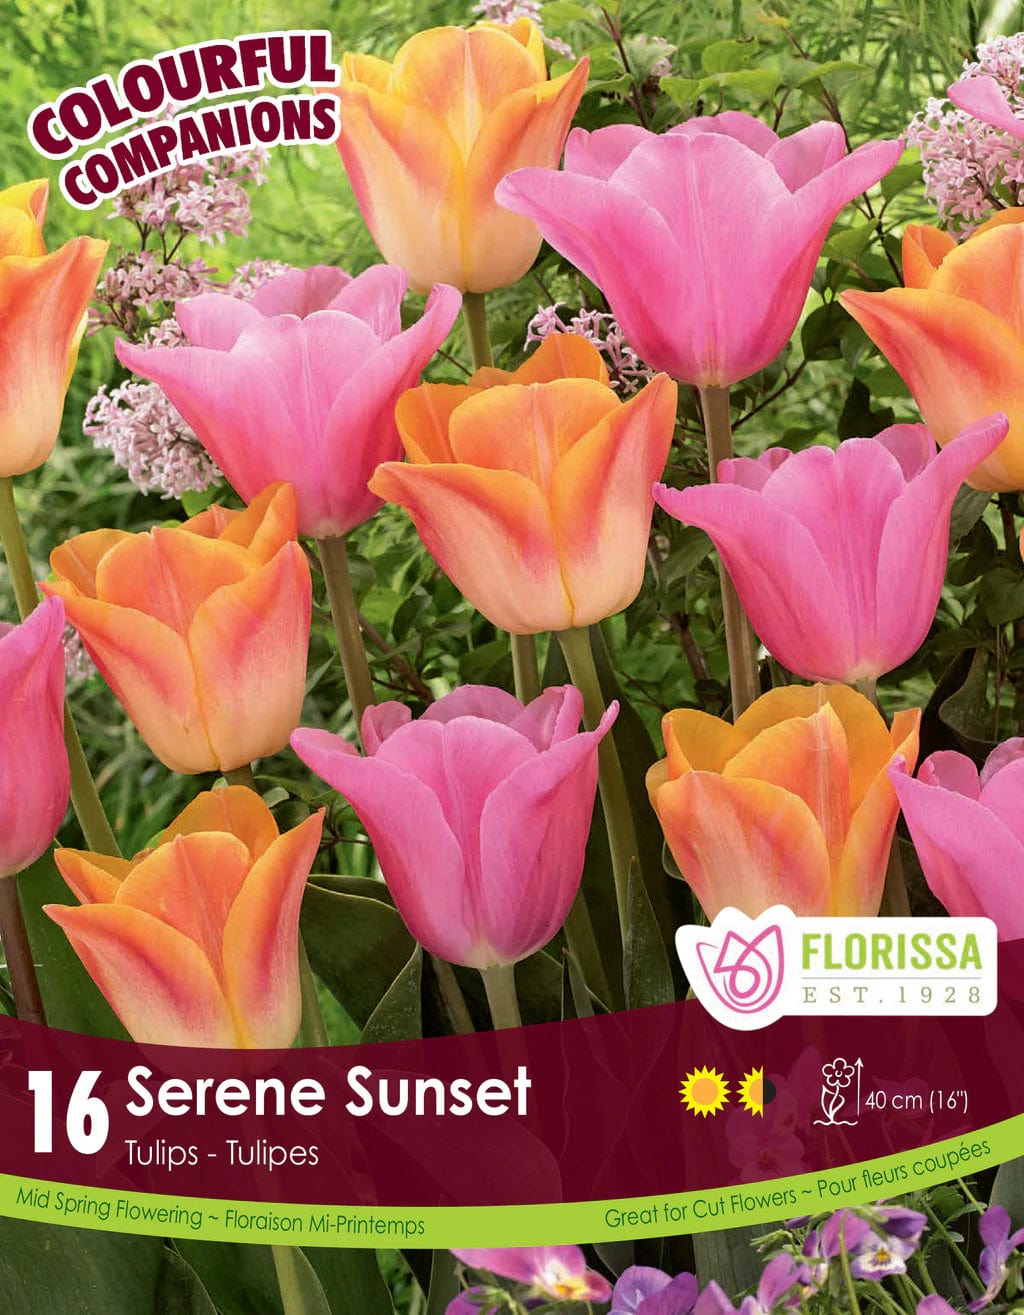 Tulips - Serene Sunset, Colourful Companions, 16 Pack